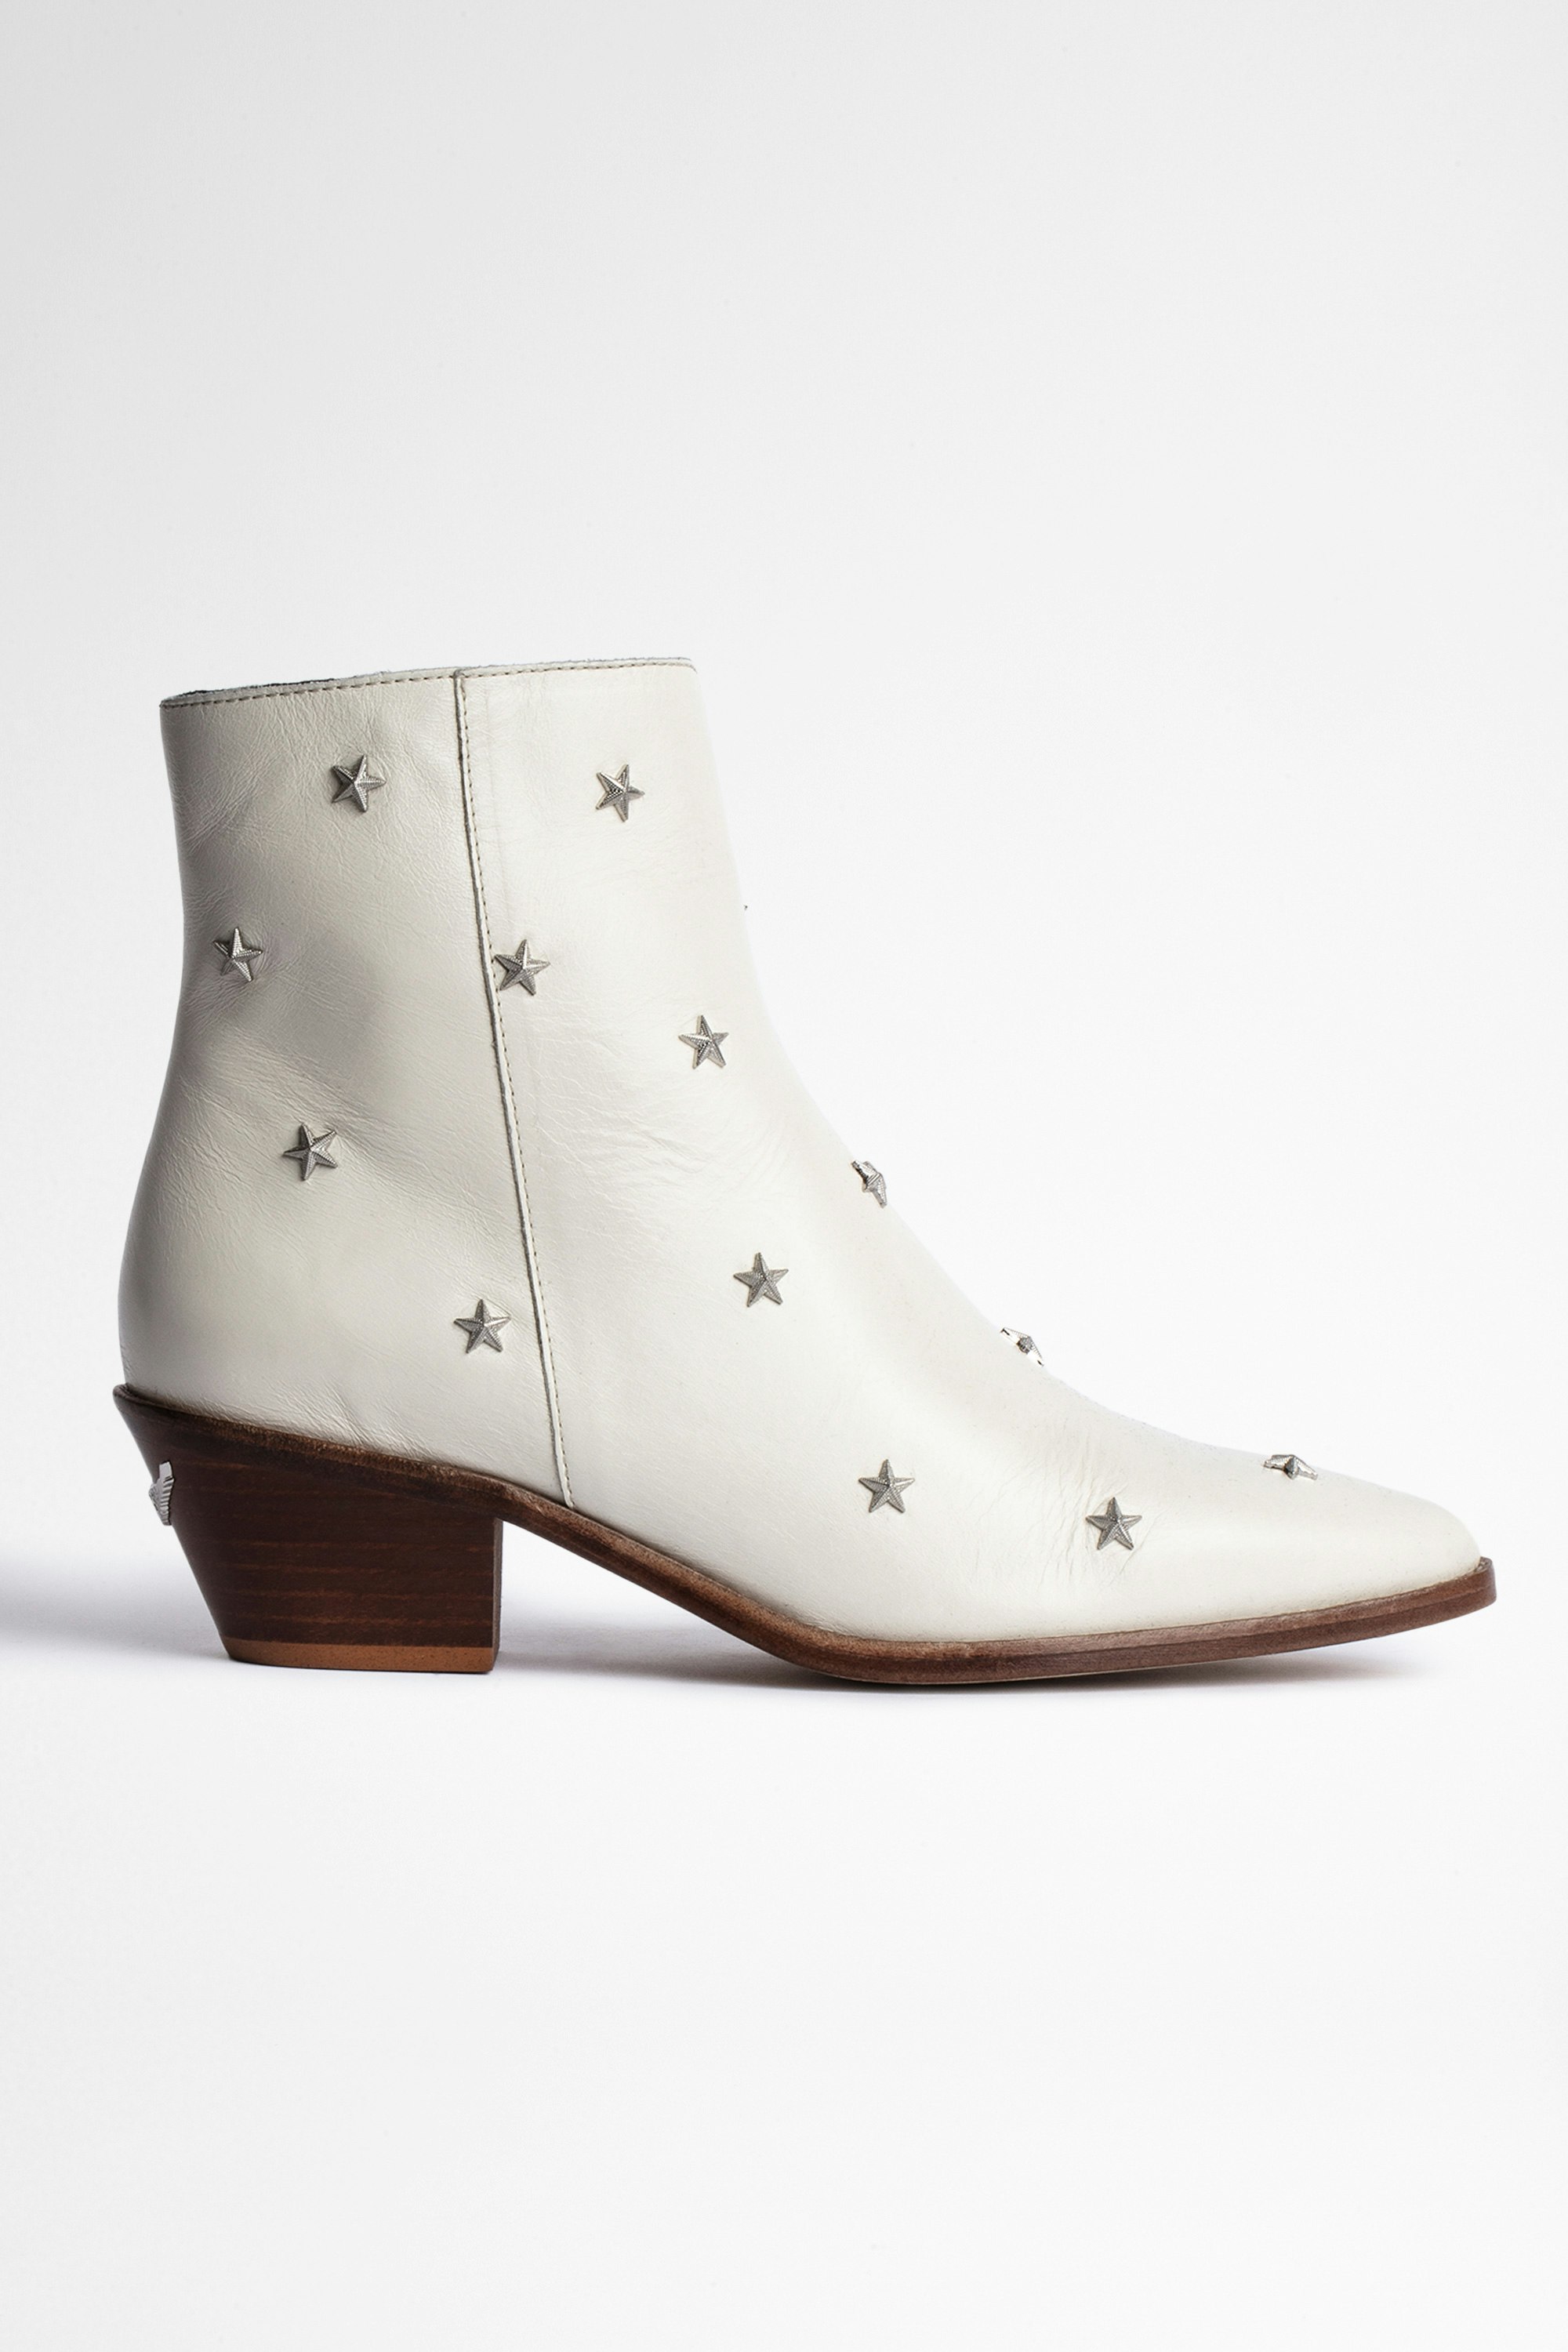 Tyler Boots Women's ecru leather boots with silver star studs